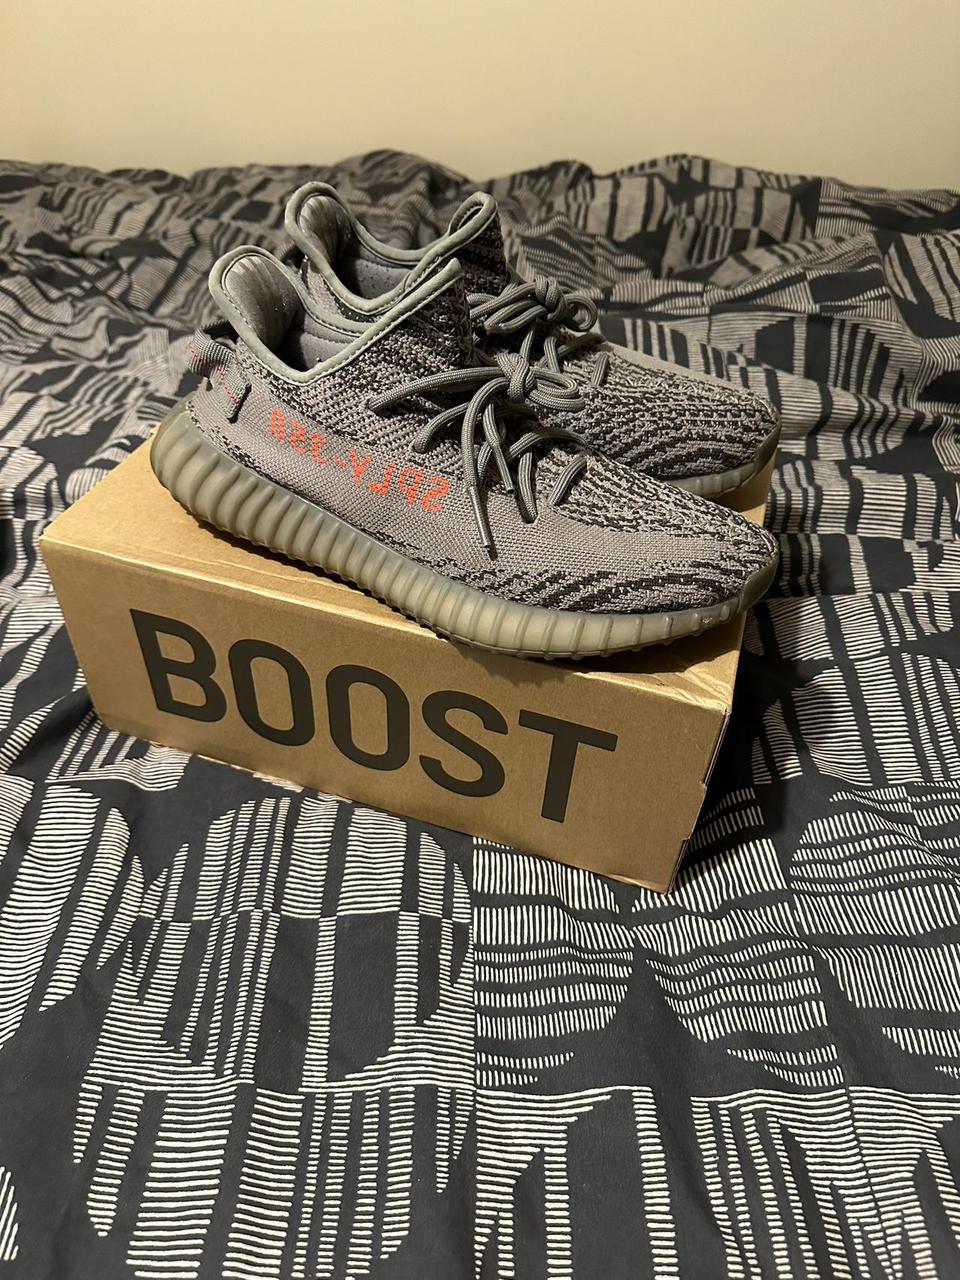 Adidas Yeezy 350 Beluga size 8 Barely worn and in... - Depop